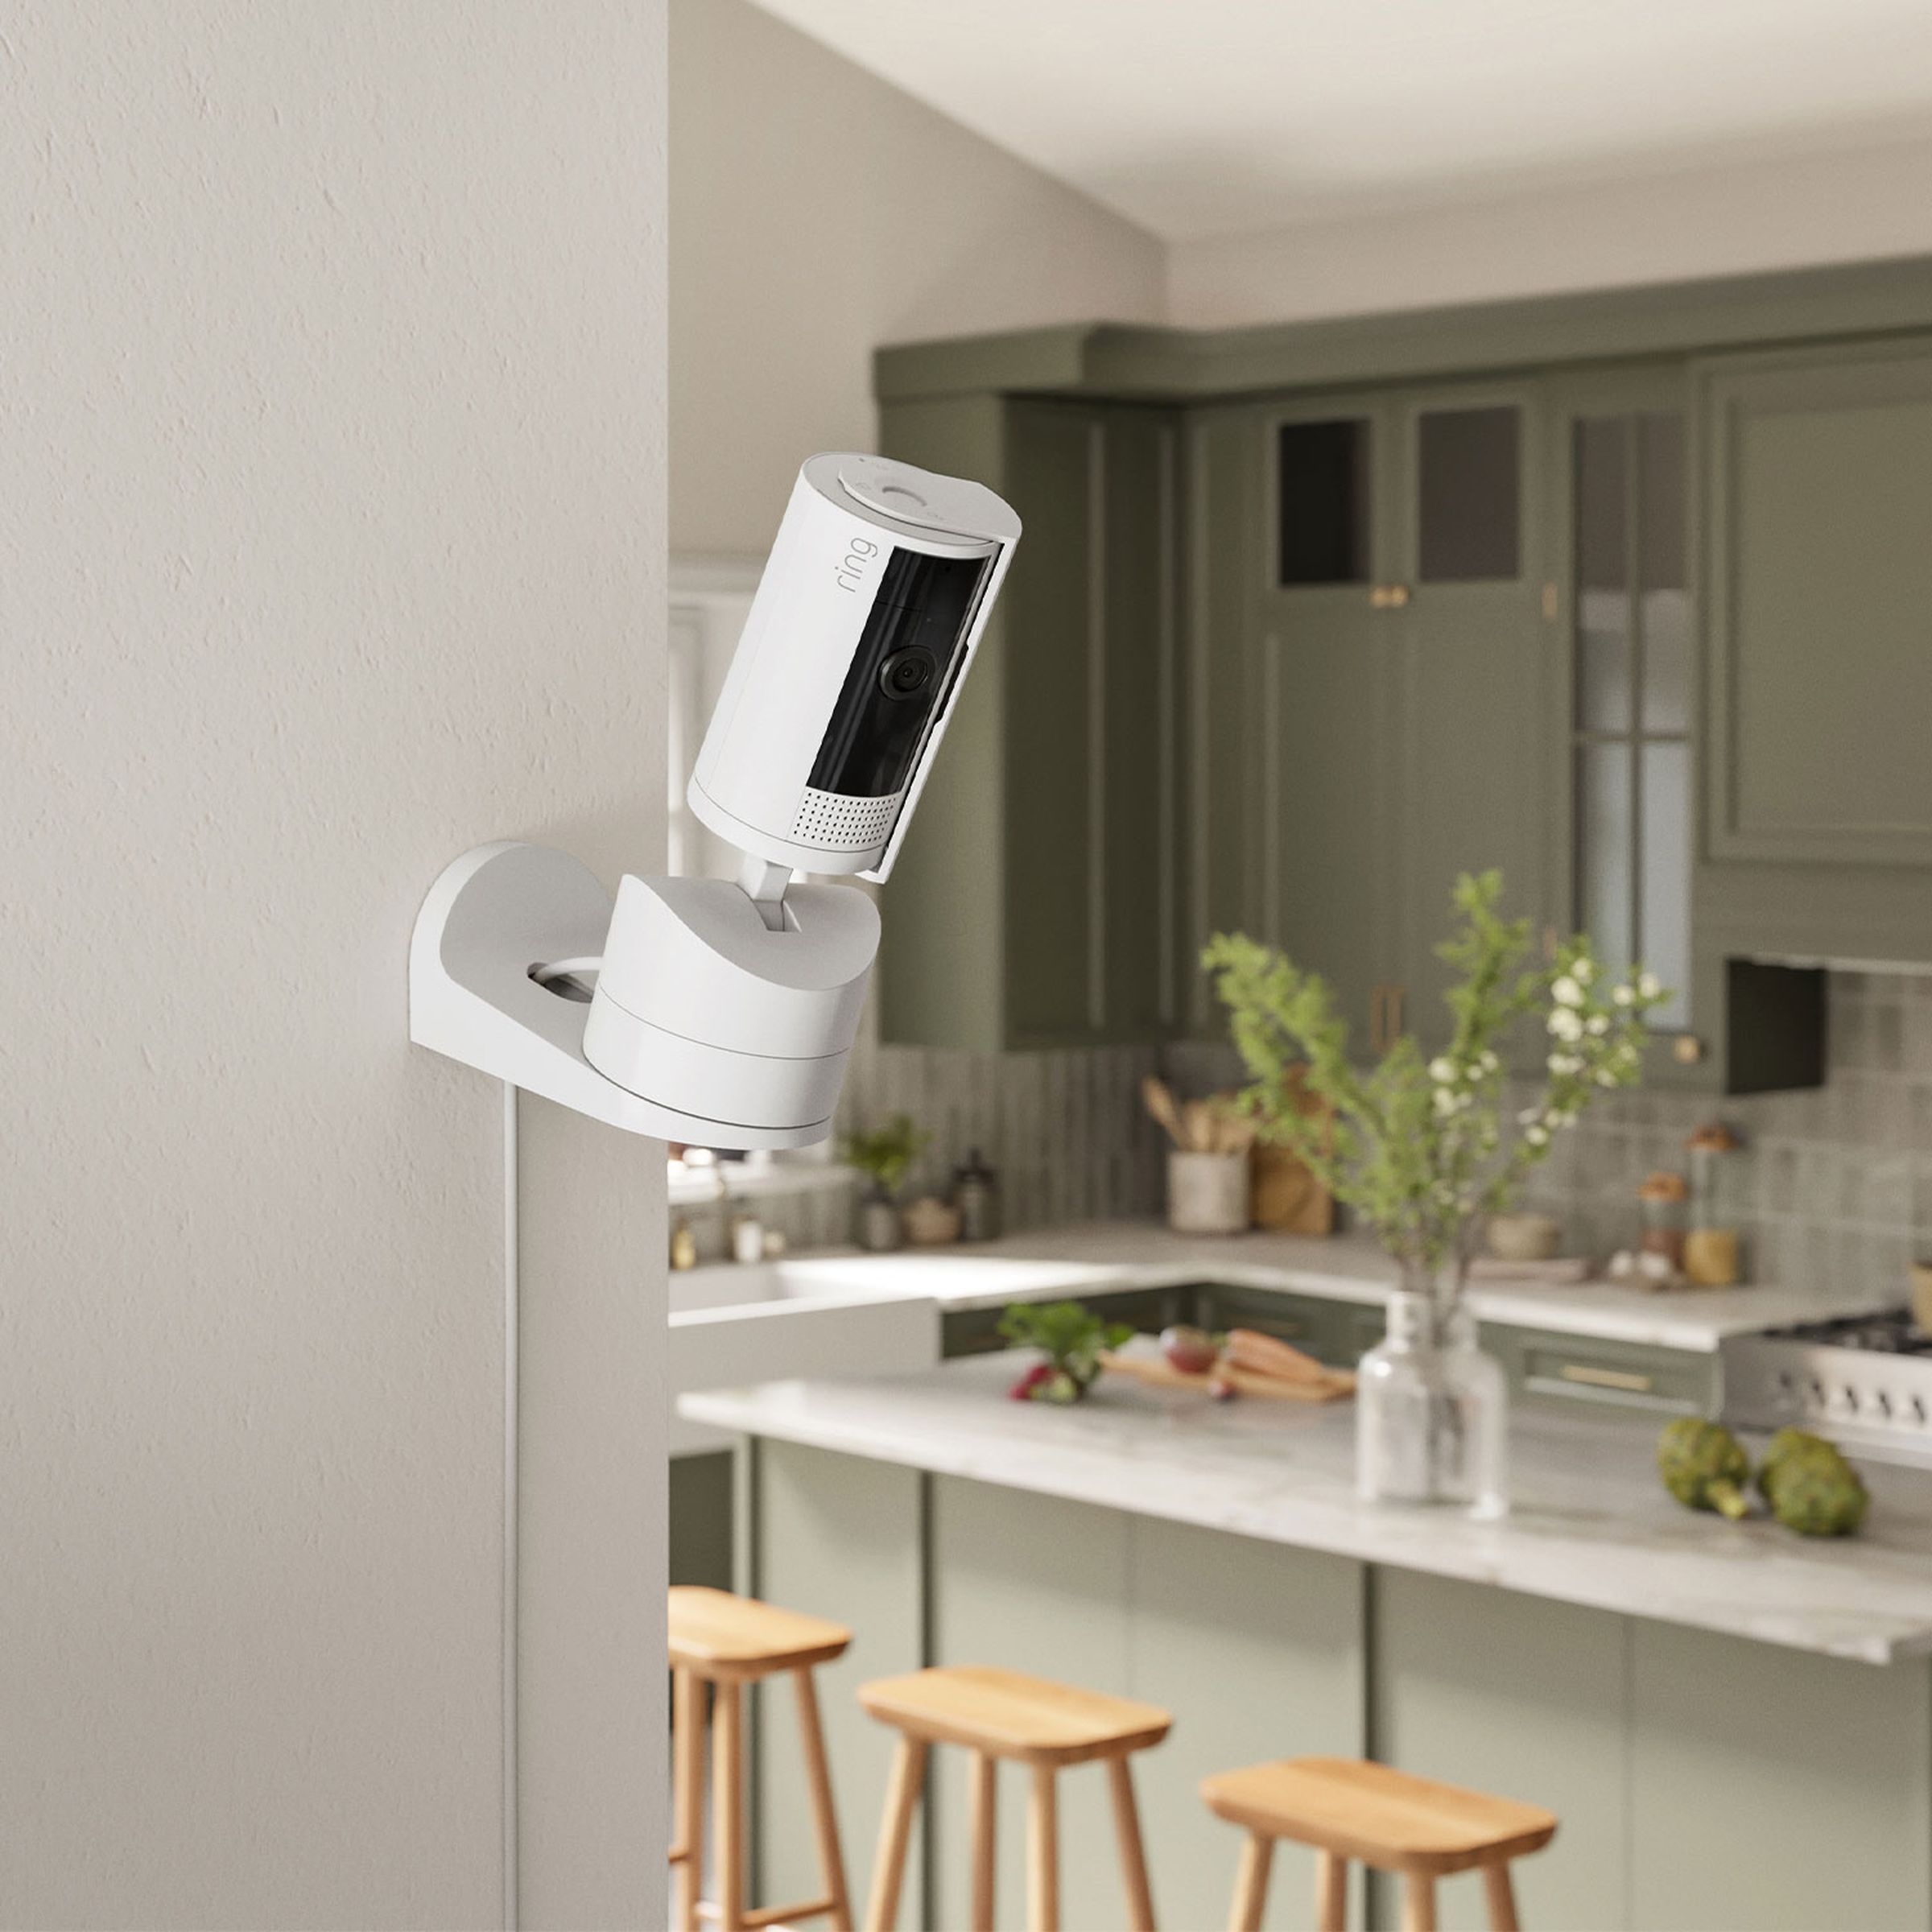 <em>The pan-tilt cam comes with two mounts, a ceiling and wall mount.</em>